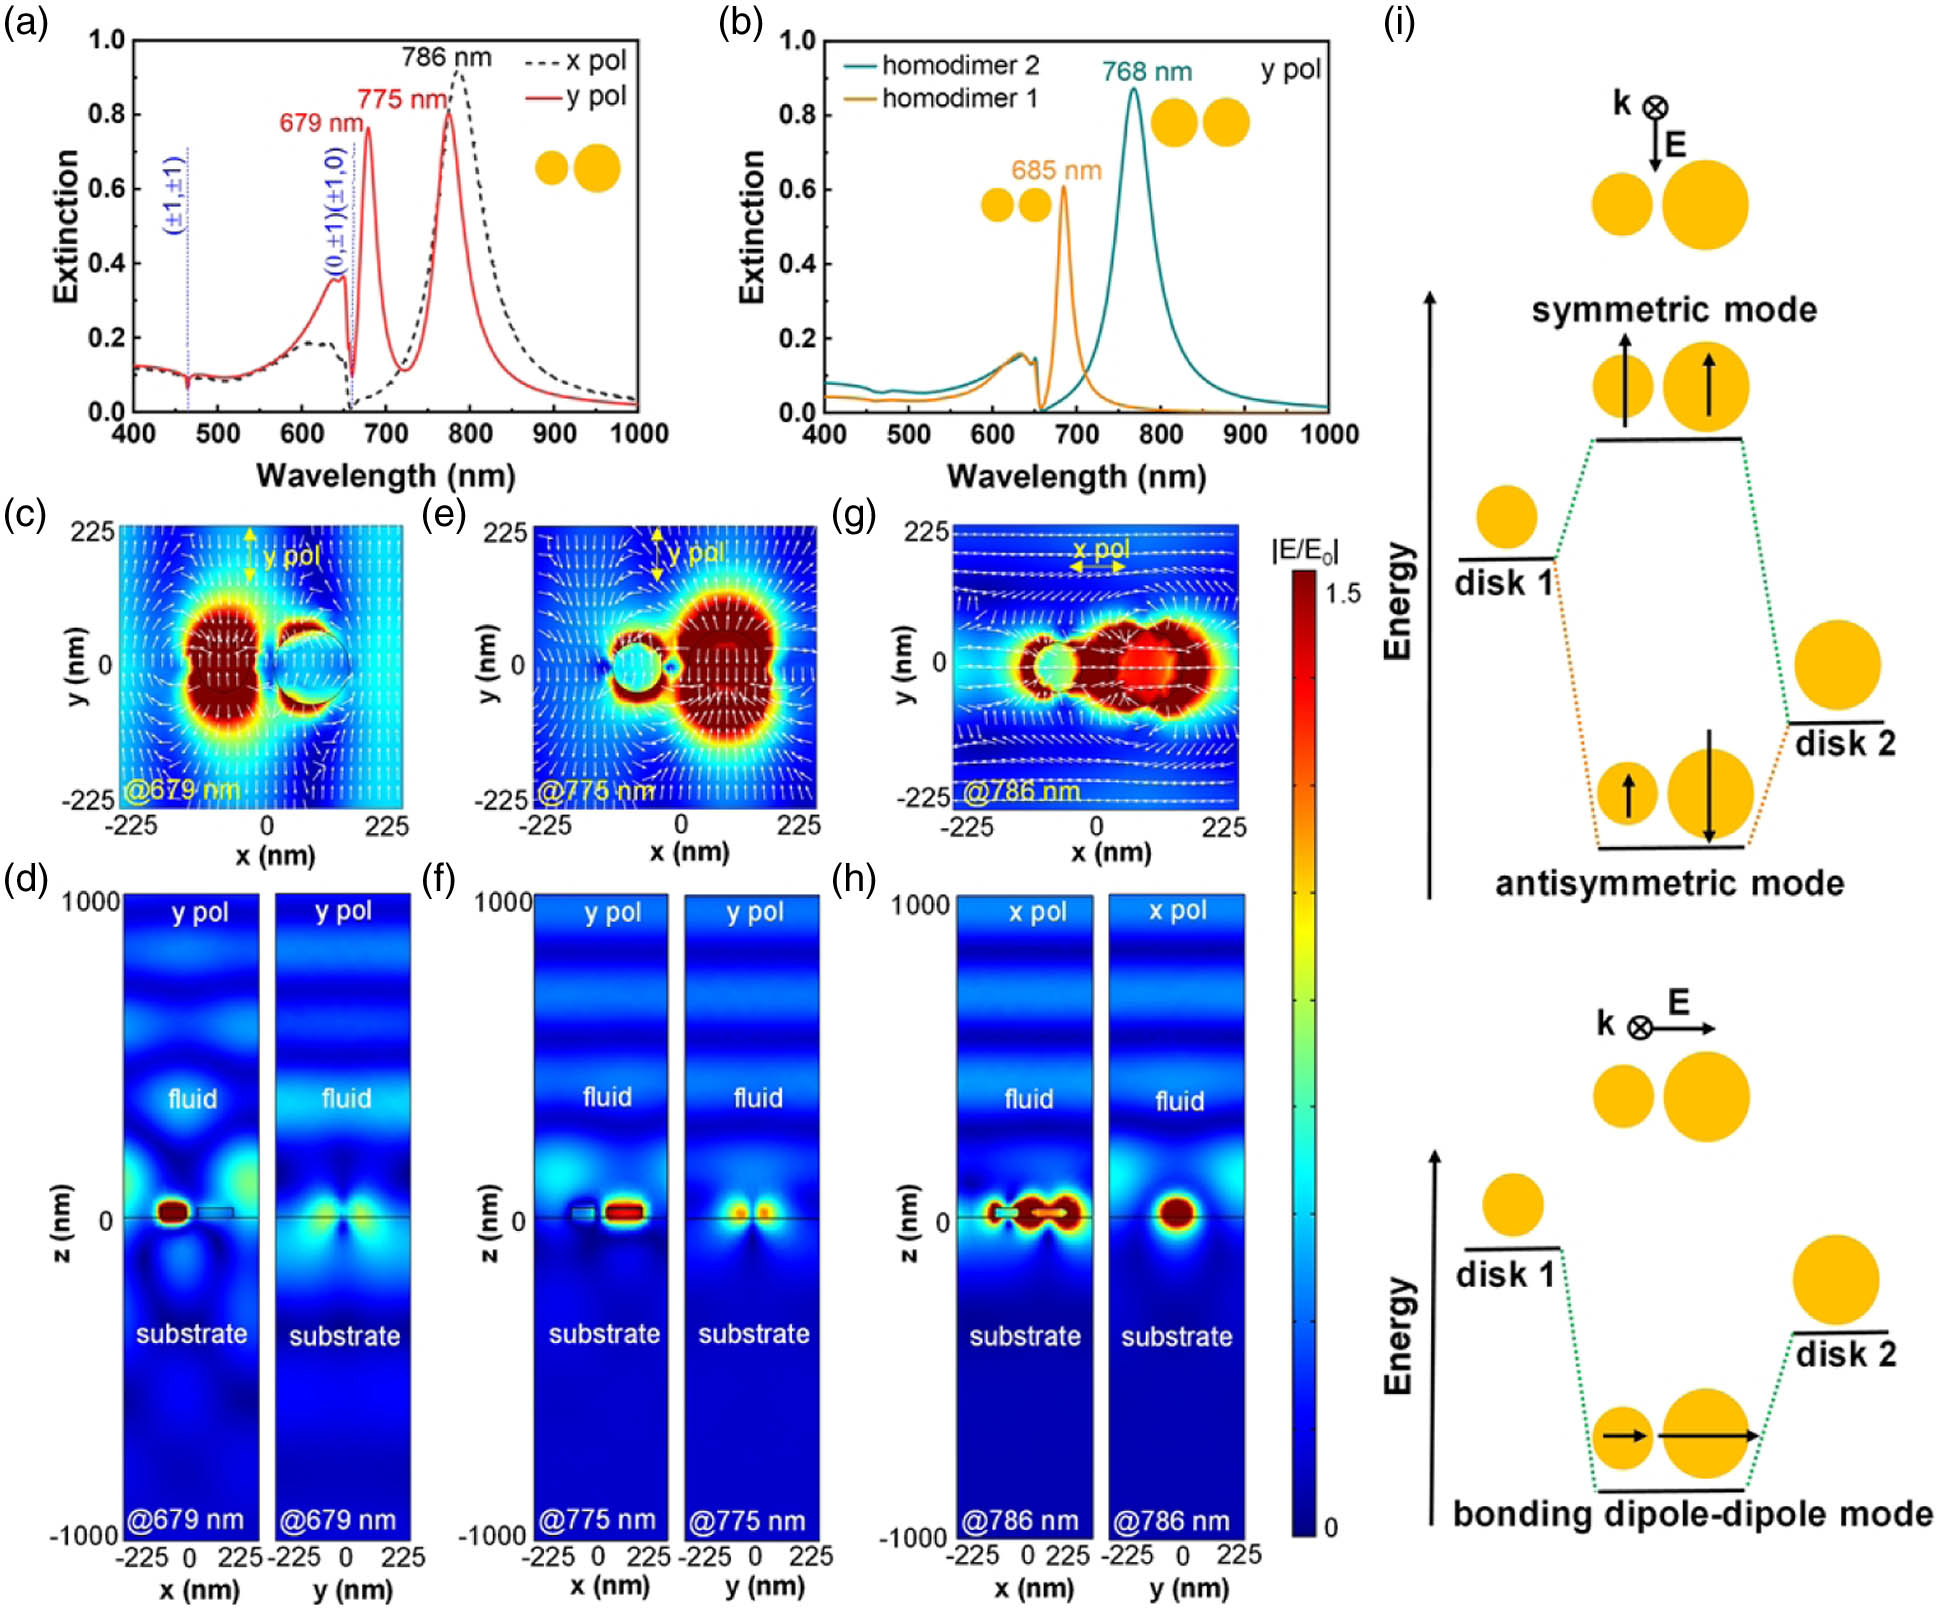 Optical properties of plasmonic metasurface. (a) Extinction spectra of MDH arrays for x- and y-polarized incidence conditions. Inset: unit cell of MDH arrays. (b) Extinction spectra of homodimer 1 and homodimer 2 arrays for y-polarized incidence conditions. Inset: unit cells of homodimer 1 and 2 arrays. (c)–(h) Electric field distributions of MDH at the two resonant wavelengths of ∼679 nm and ∼775 nm under y polarization (c)–(f) and ∼786 nm under x-polarization (g), (h). (i) Schematic plasmon hybridization of MDH.